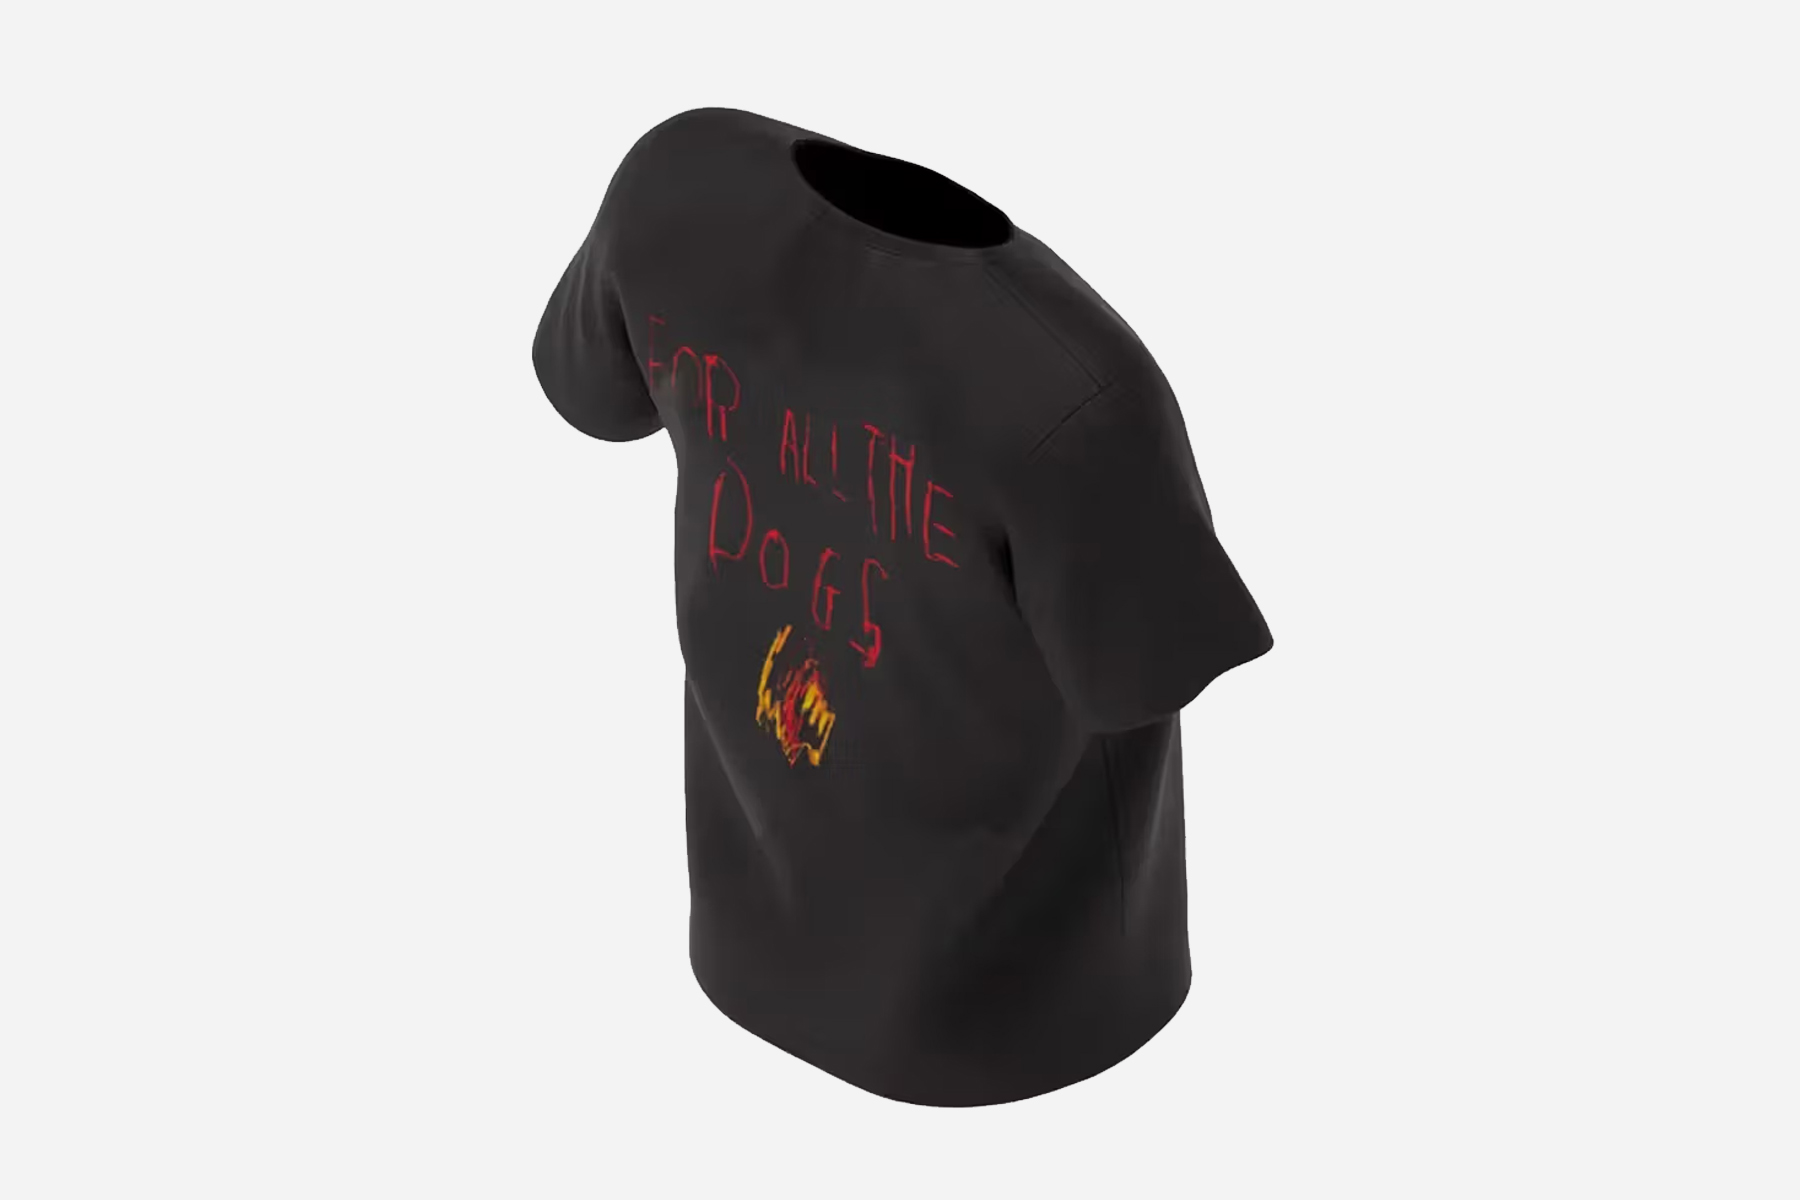 Drake For All The Dogs Merch Tee